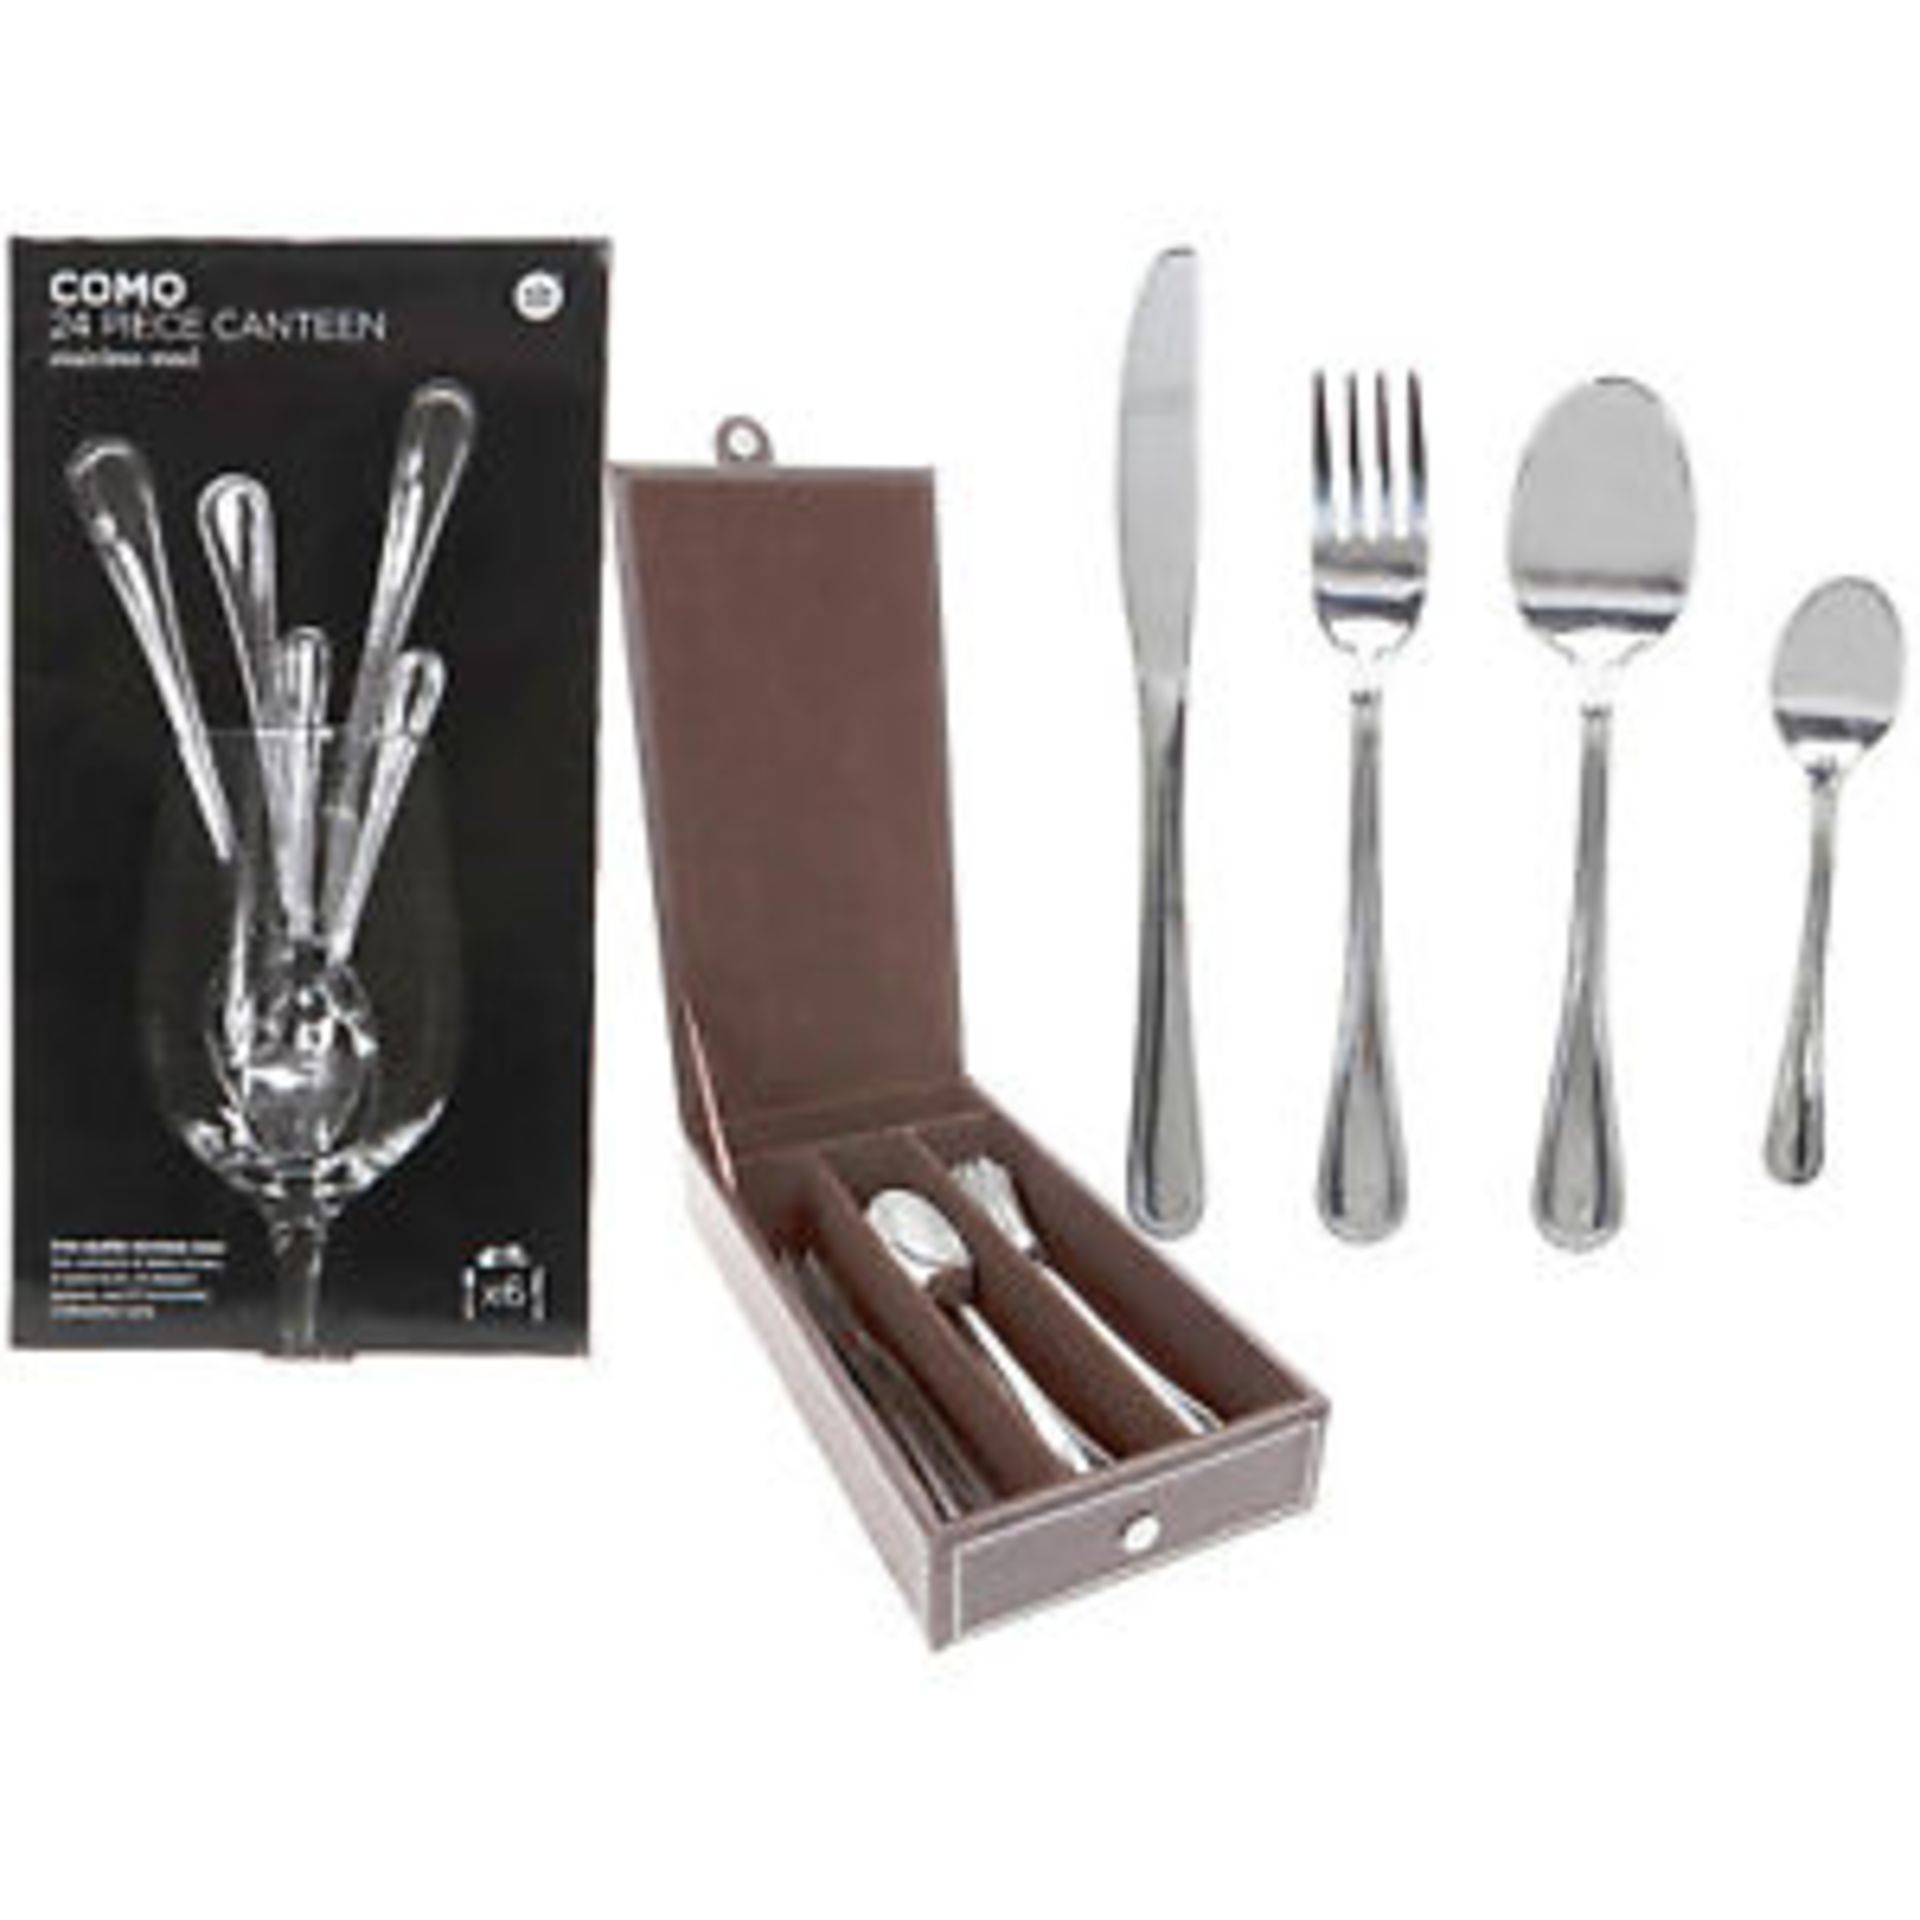 V Brand New Como 24pc Stainless Steel Cutlery Set In Case - Image 2 of 2